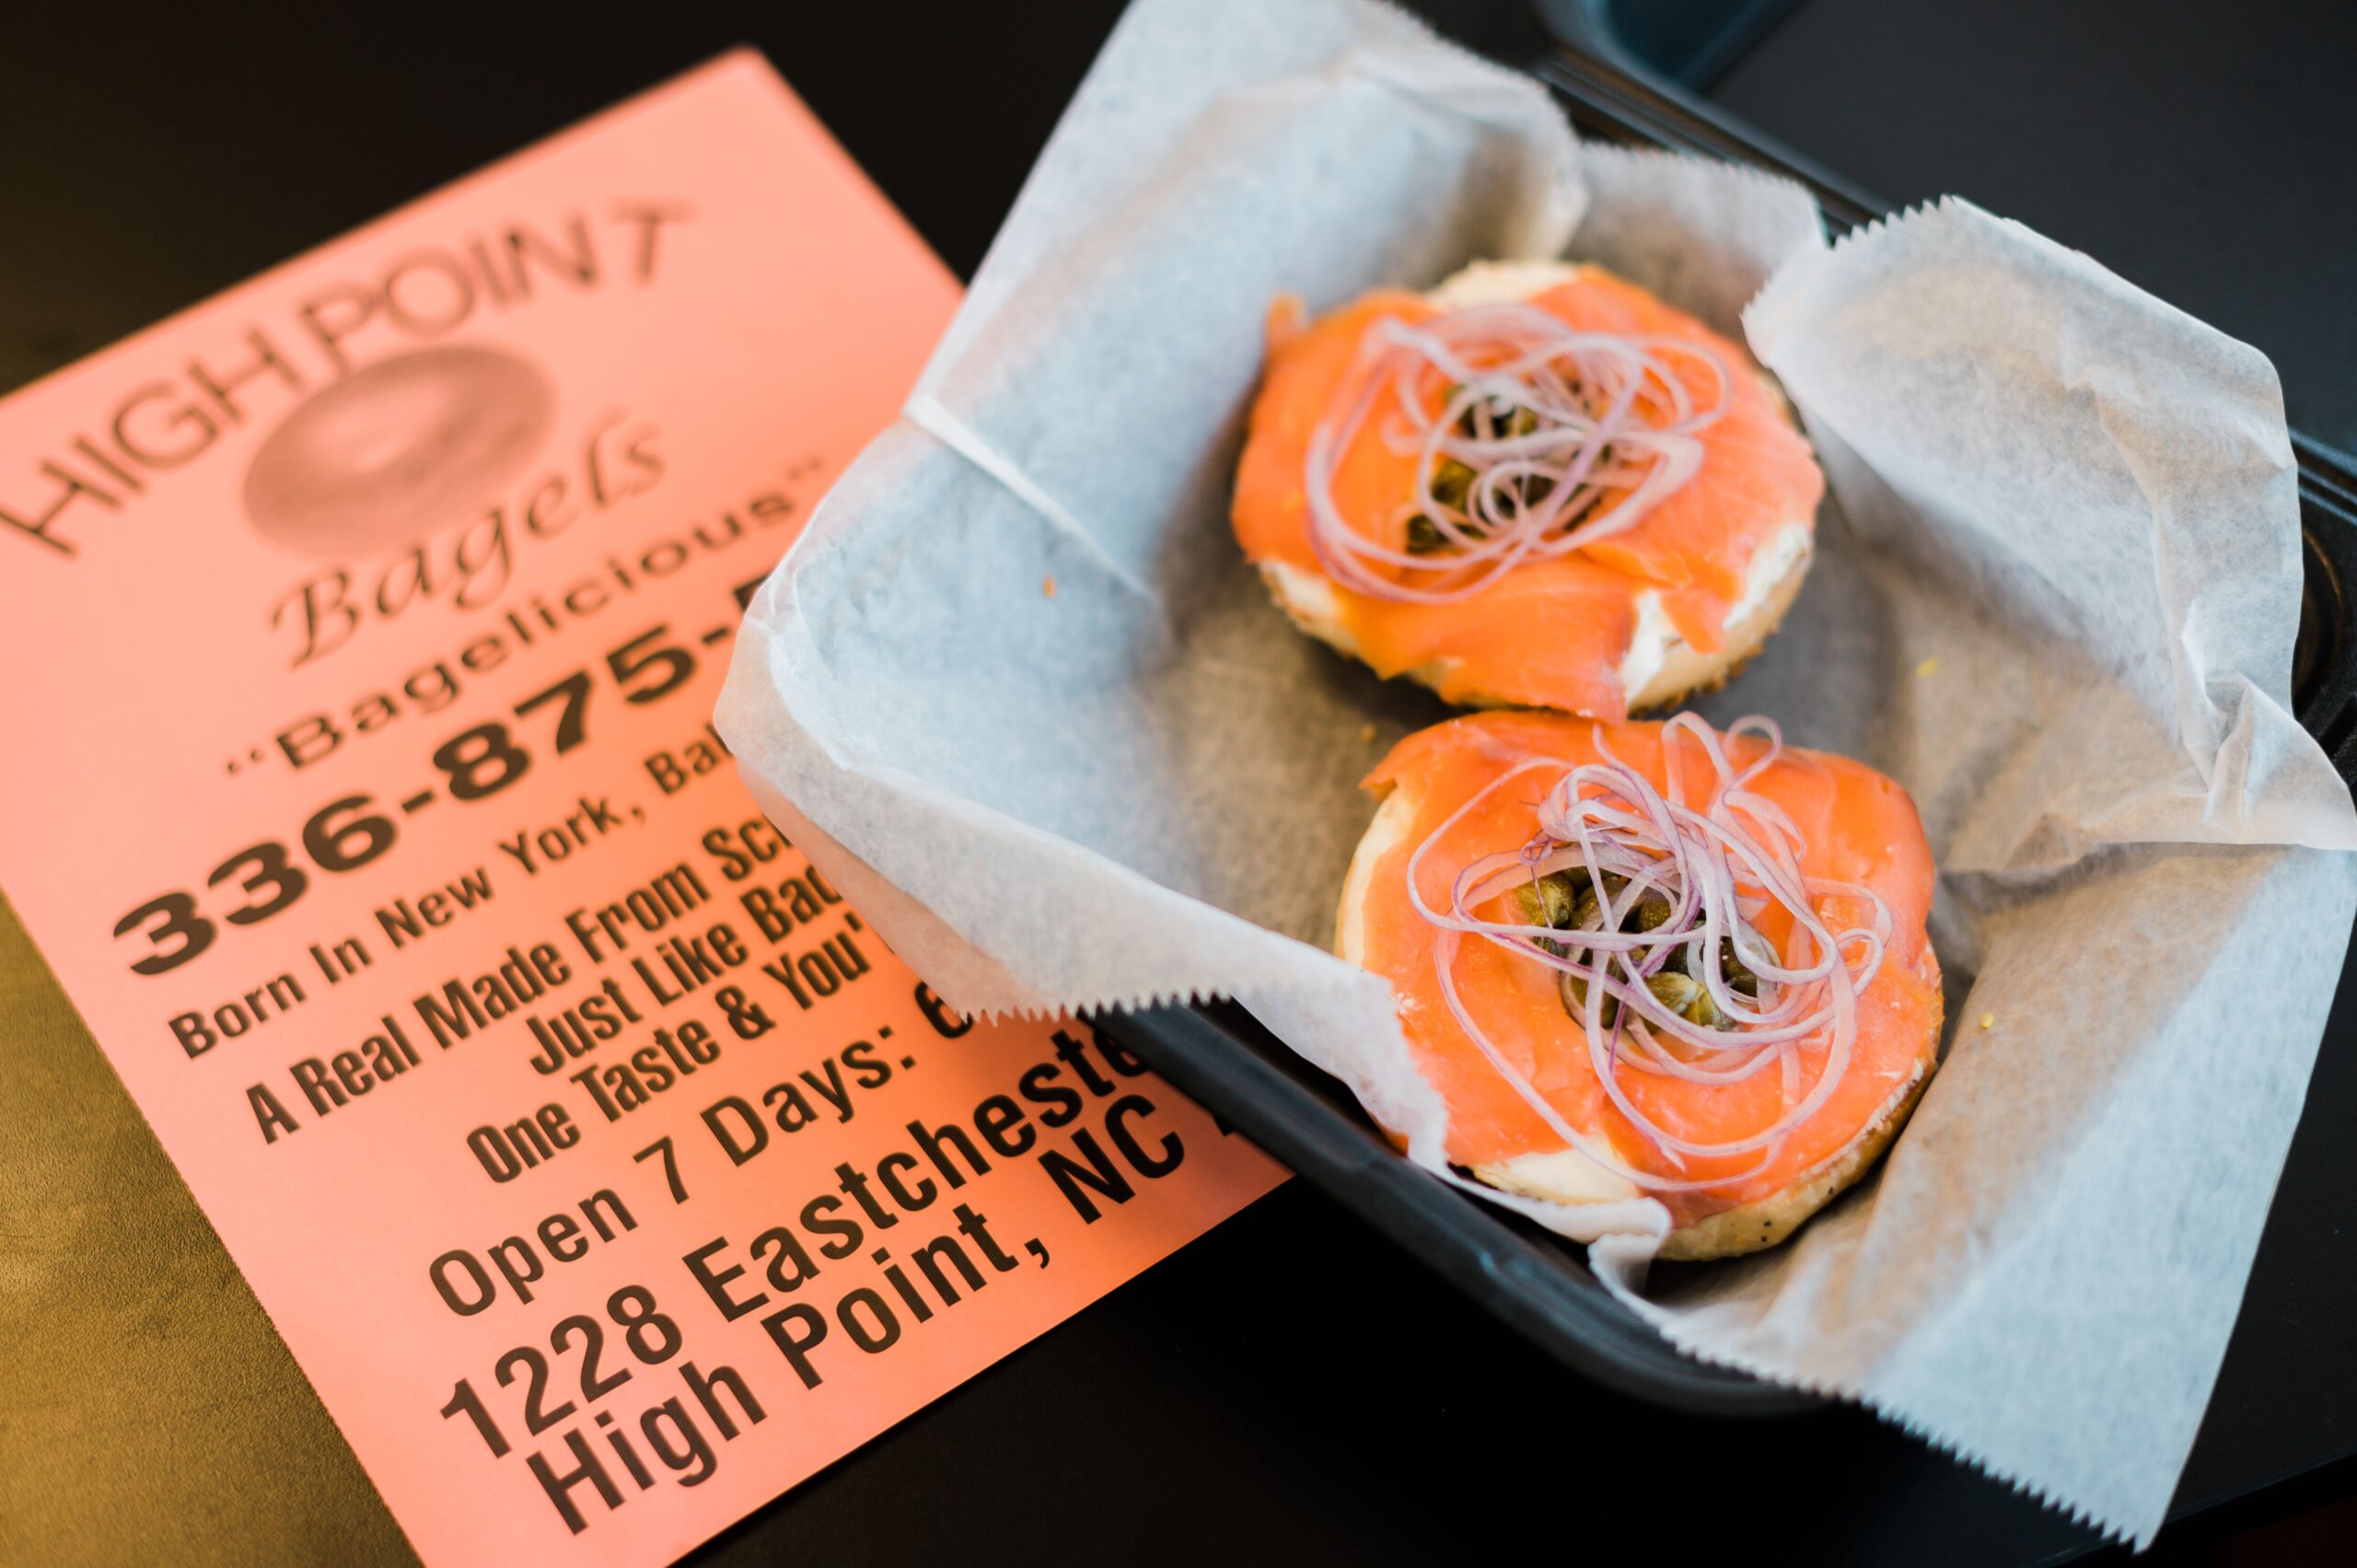 A lox bagel sits in a to-go box at High Point Bagels on top of a menu from the shop in High Point, NC.